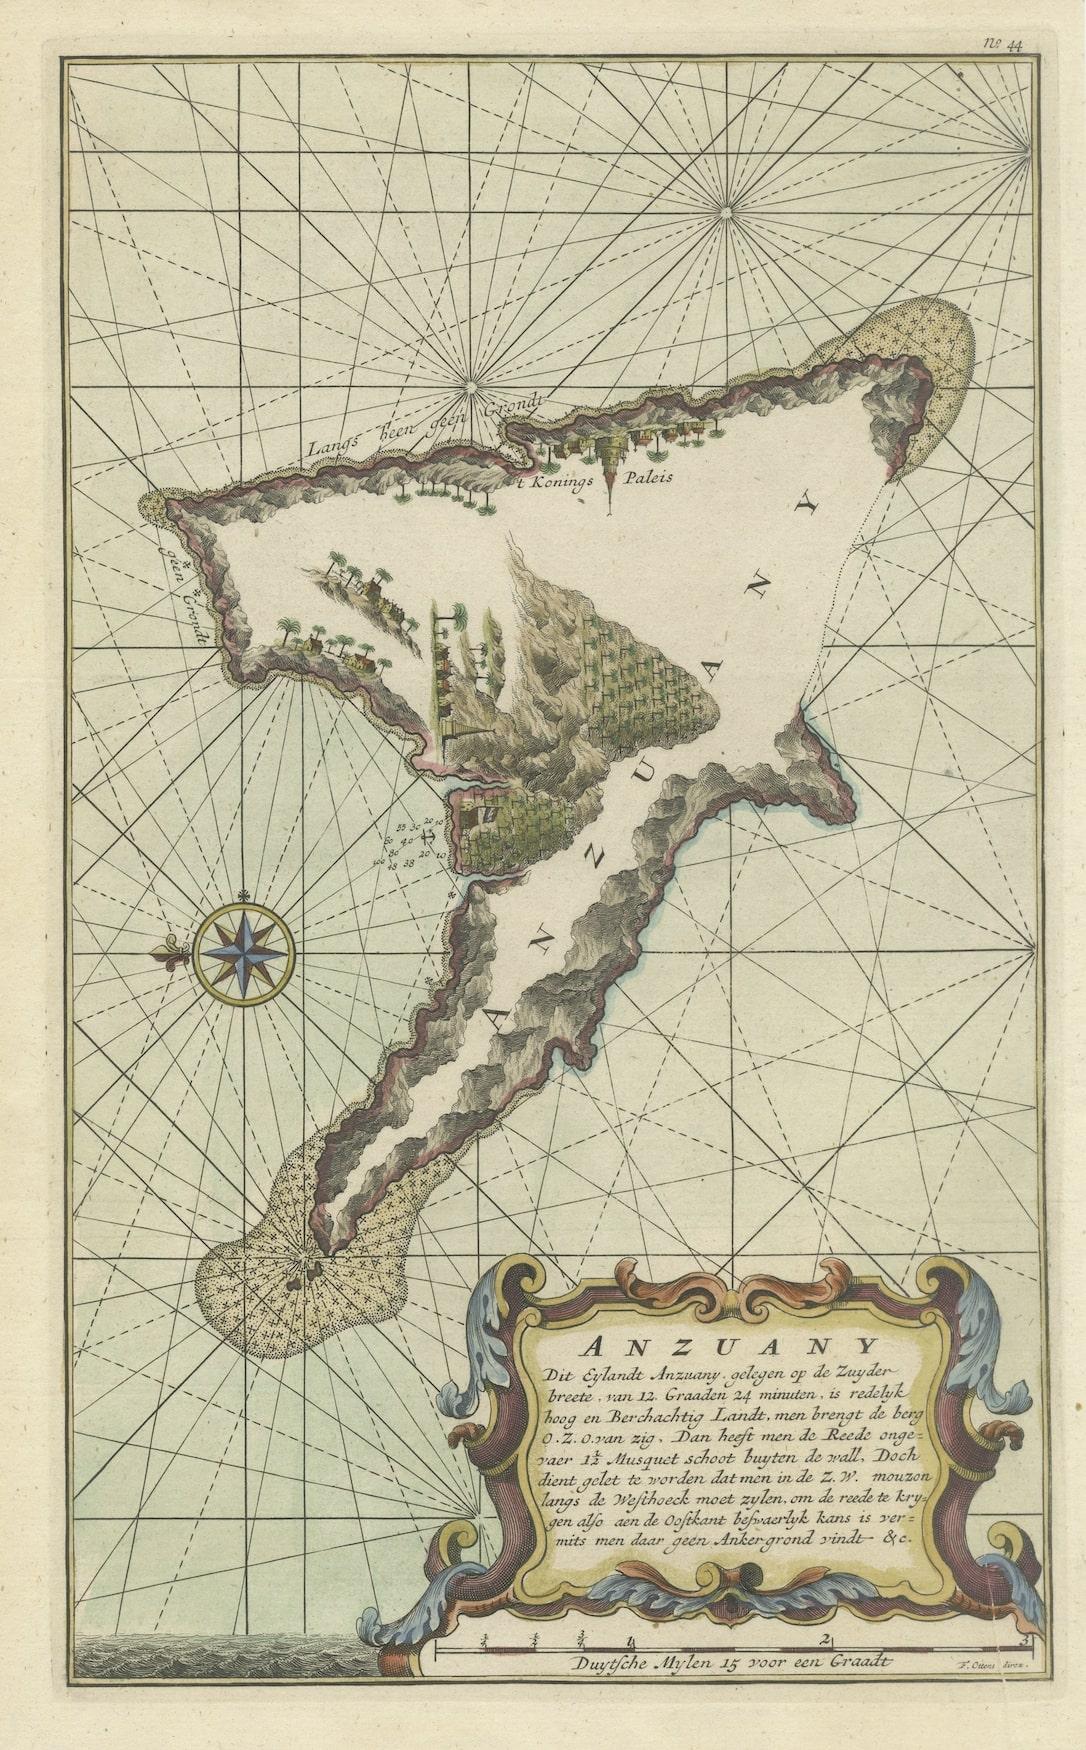 Engraved Antique Engraving of the Island Nzwani or Anzuany of the Comoros Islands, 1726 For Sale